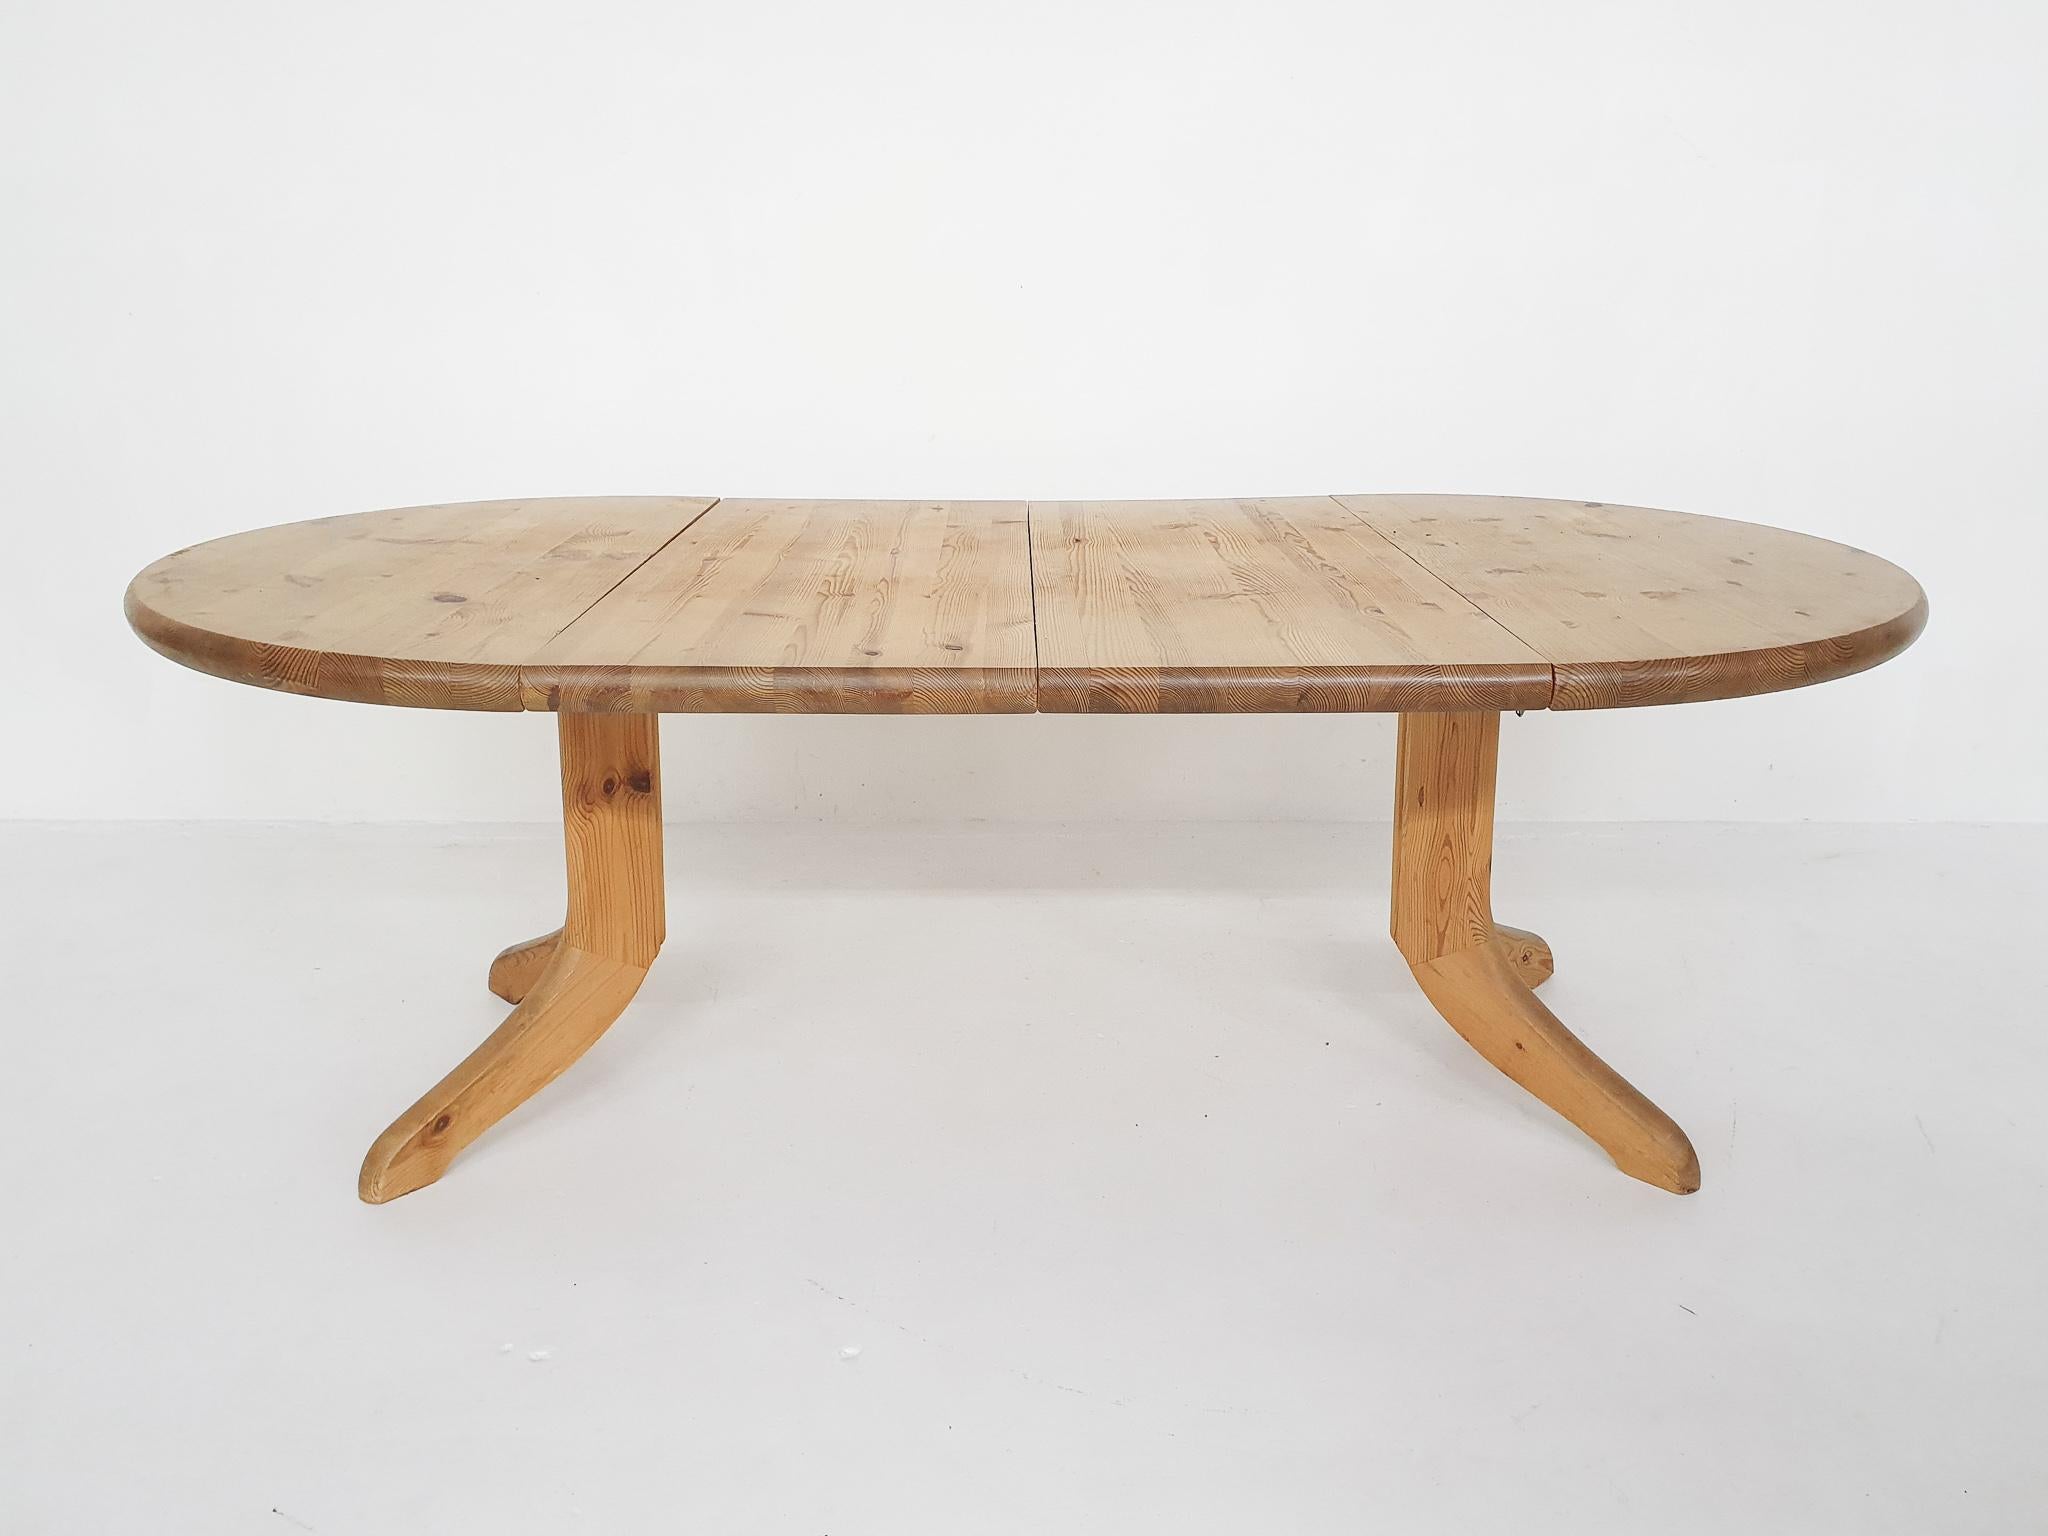 Scandinavian Modern Large Pinewood Extendable Dining Table, Attrb. Riainer Daumiller, 1970's